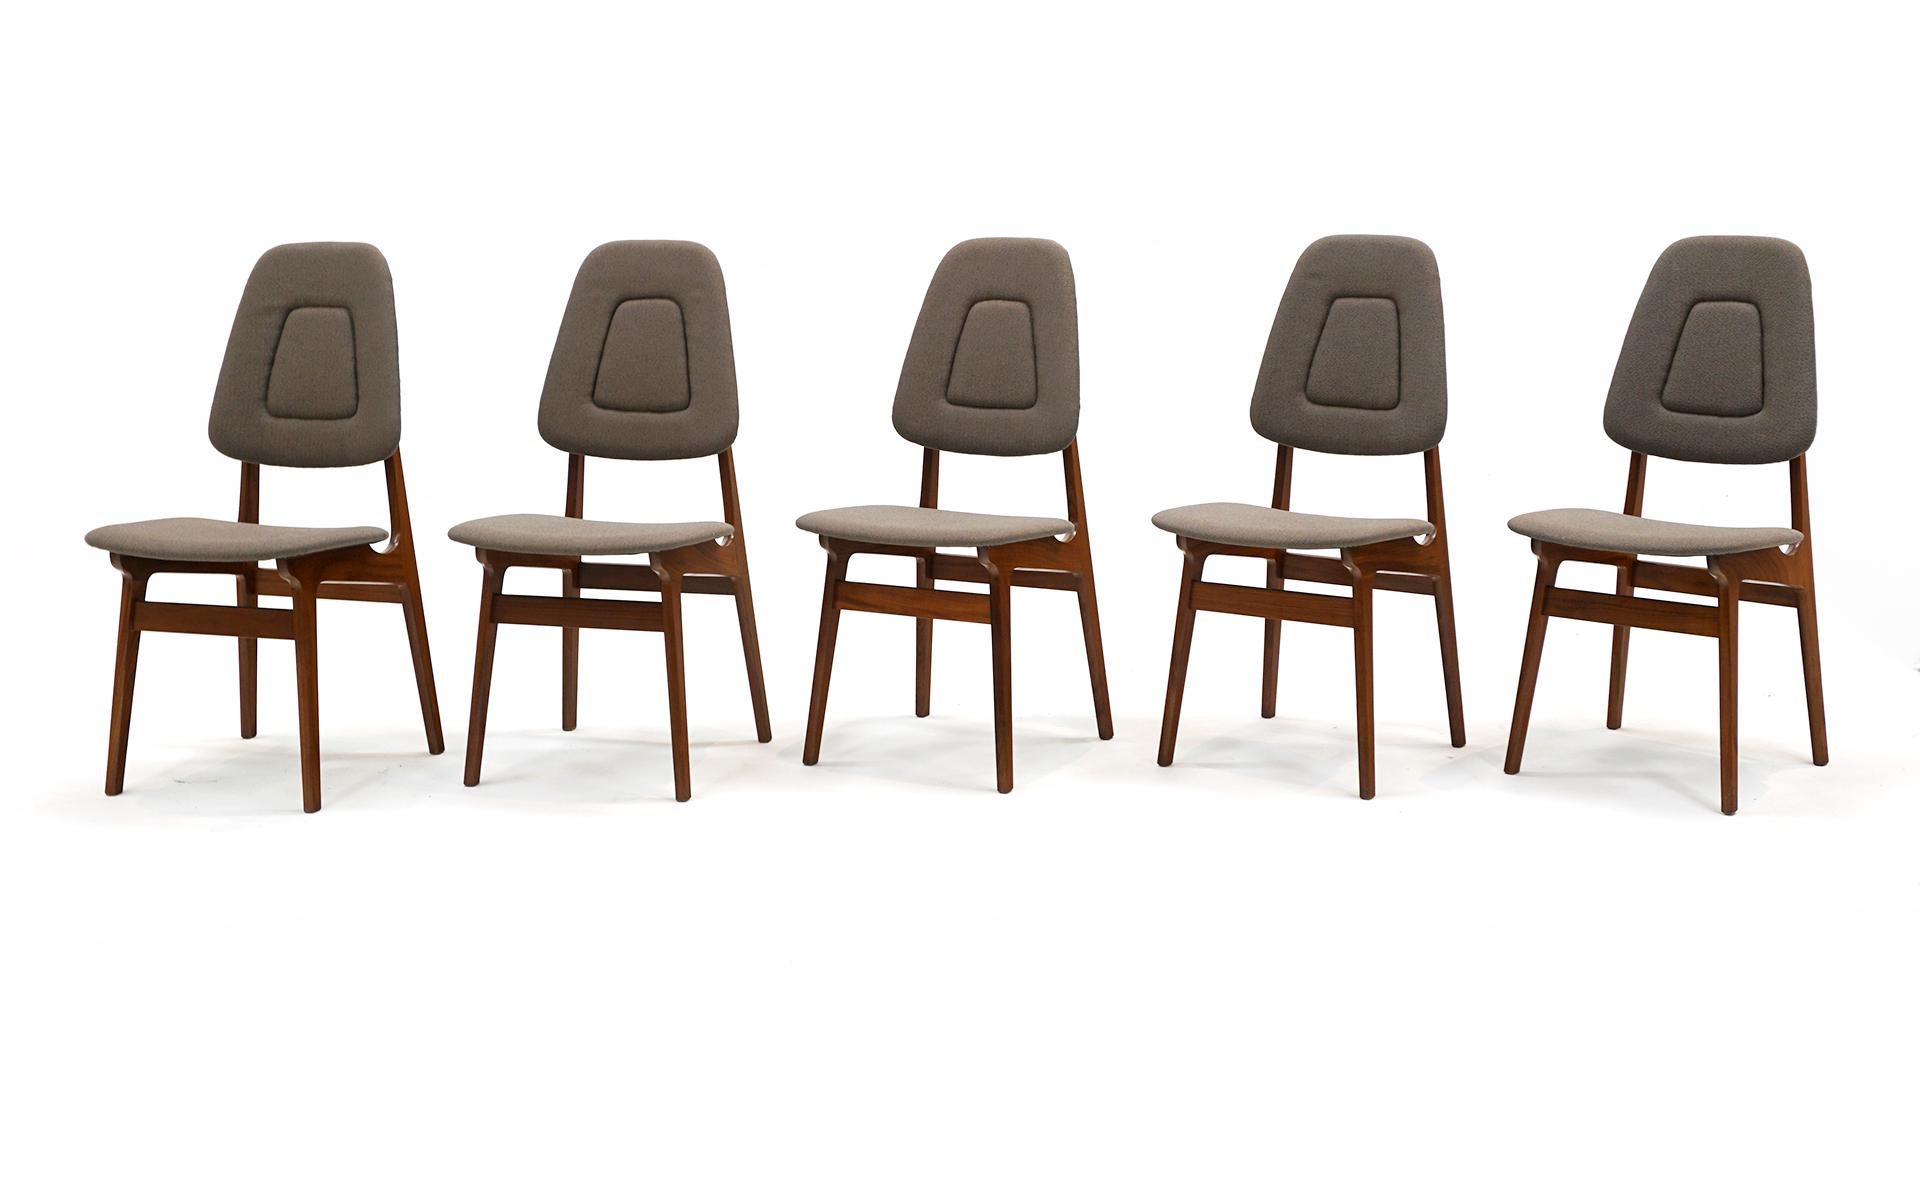 Set of 10 armless dining chairs designed by Adrian Pearsall for Craft Associates.  Walnut frames.  Expertly reupholstered in a medium gray / grey fabric.  In the next to last photo you can see a small blemish about 3/8th inch in diameter.  That is a